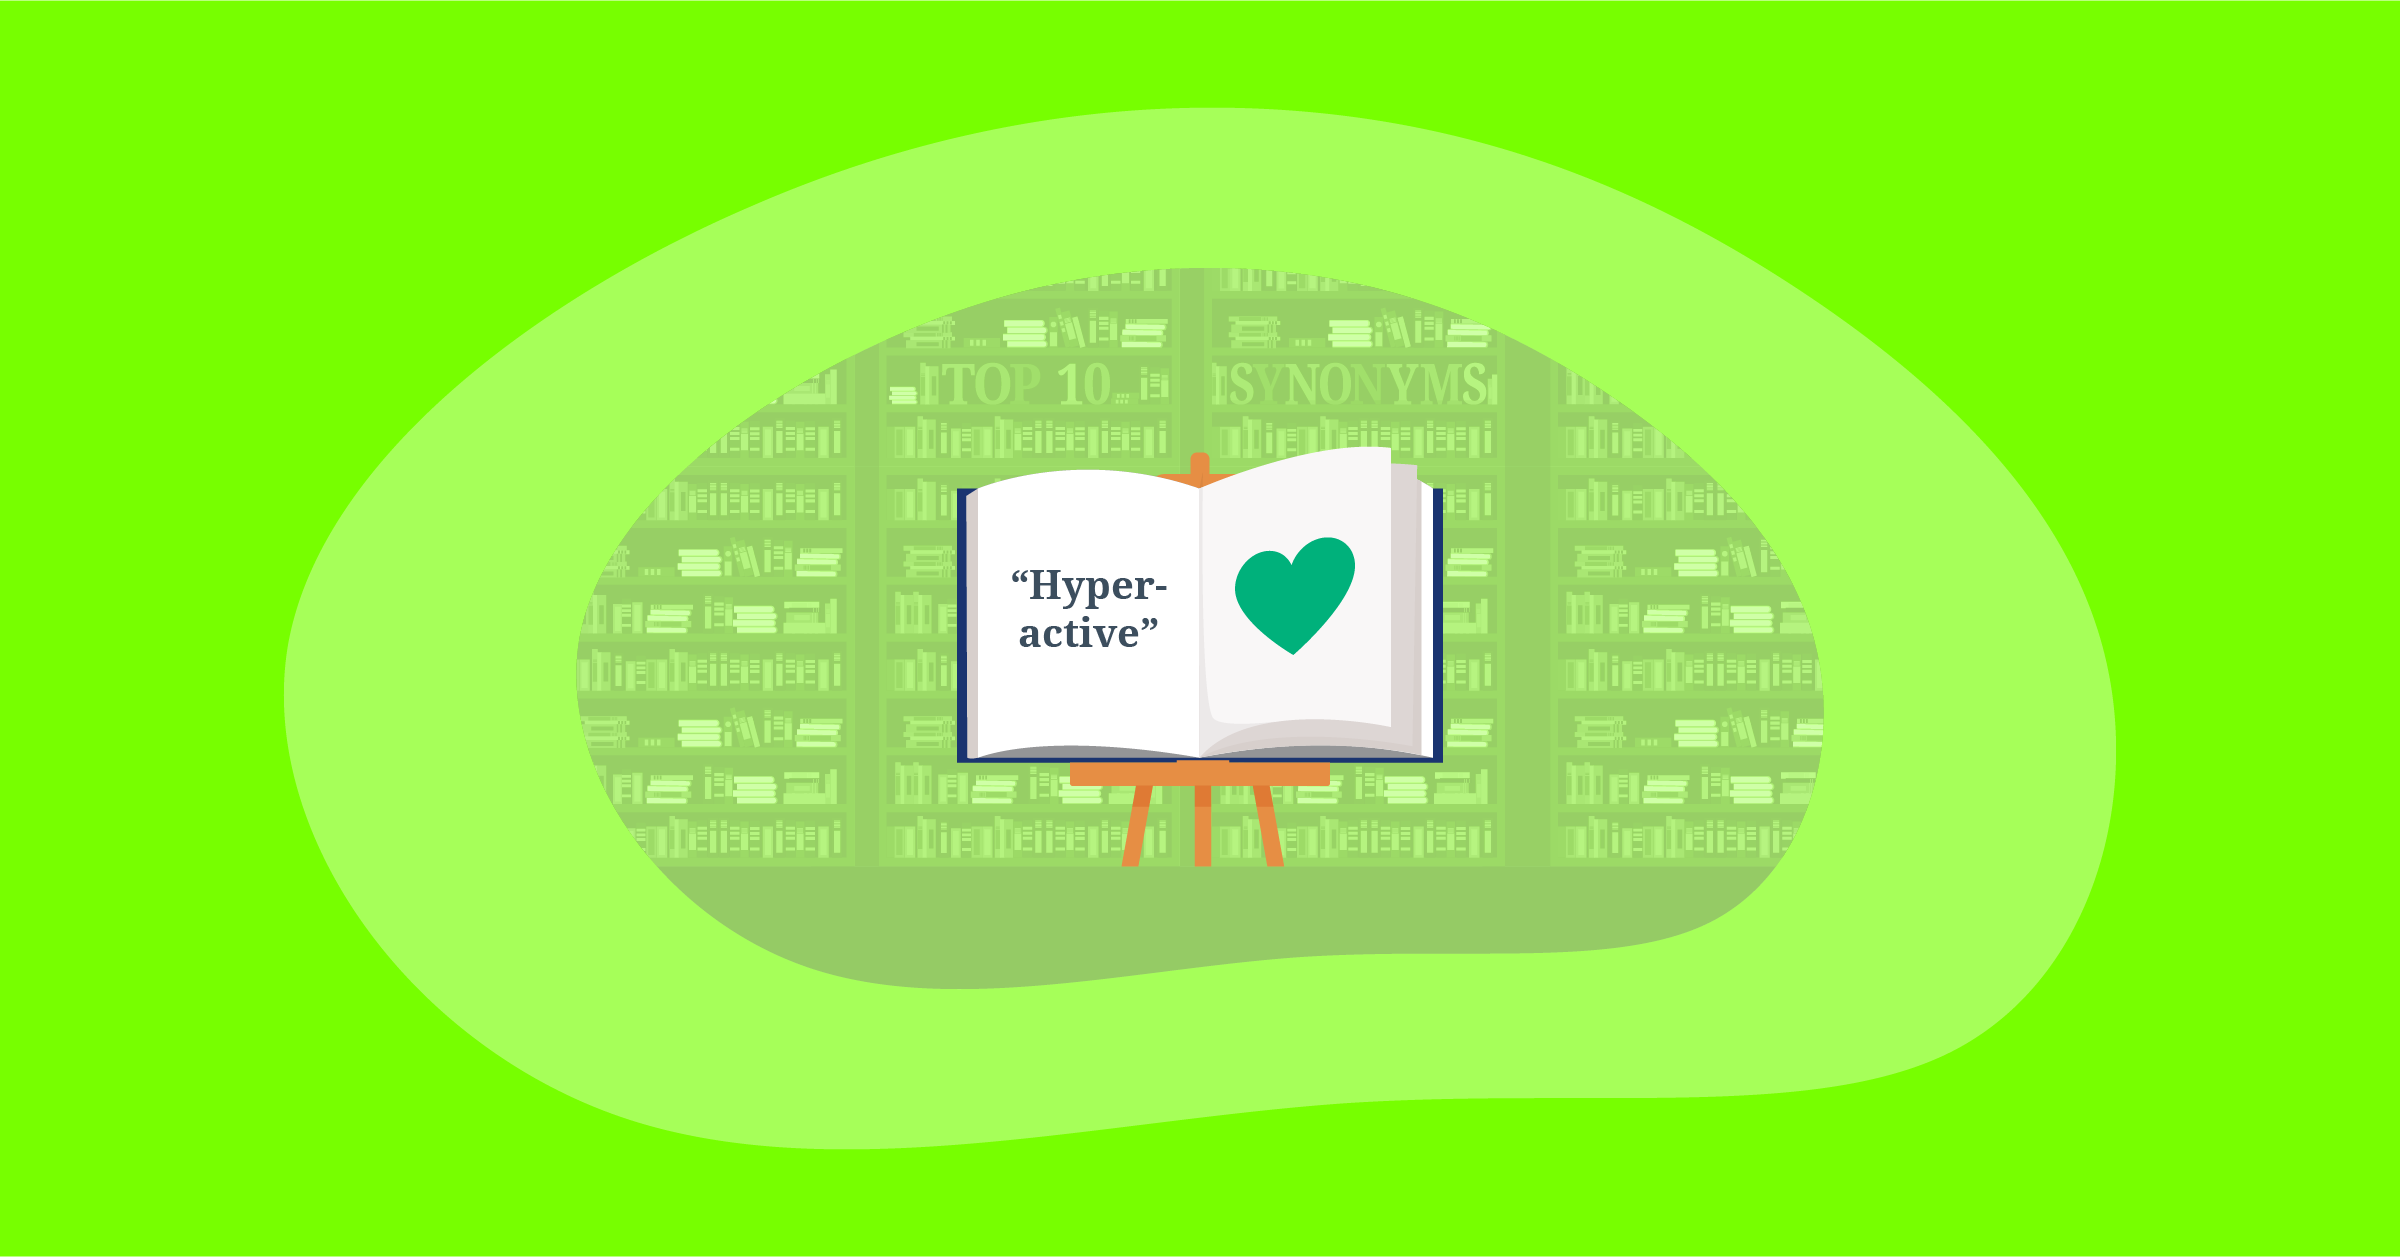 Illustration for top 10 positive impactful words for "Hyperactiive"